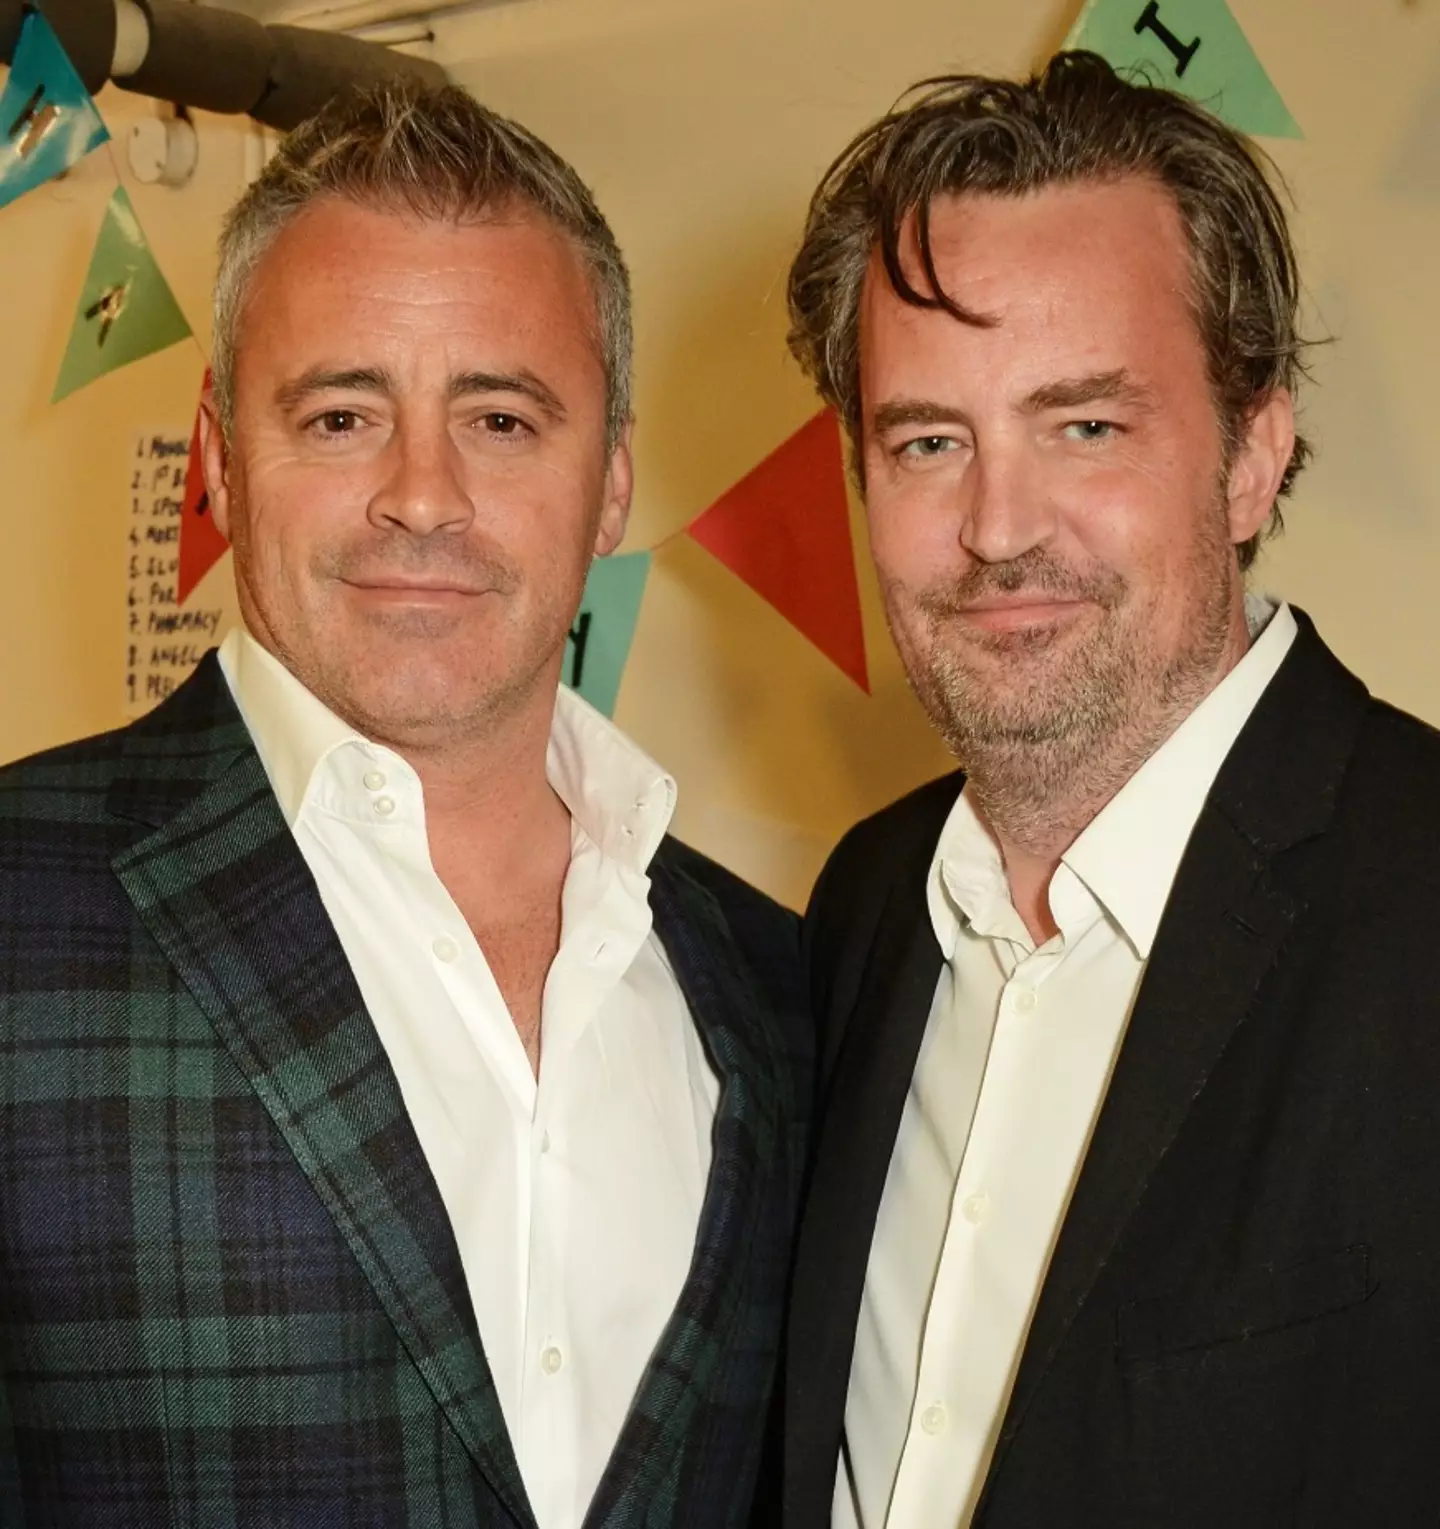 The pair starred alongside each other in Friends.